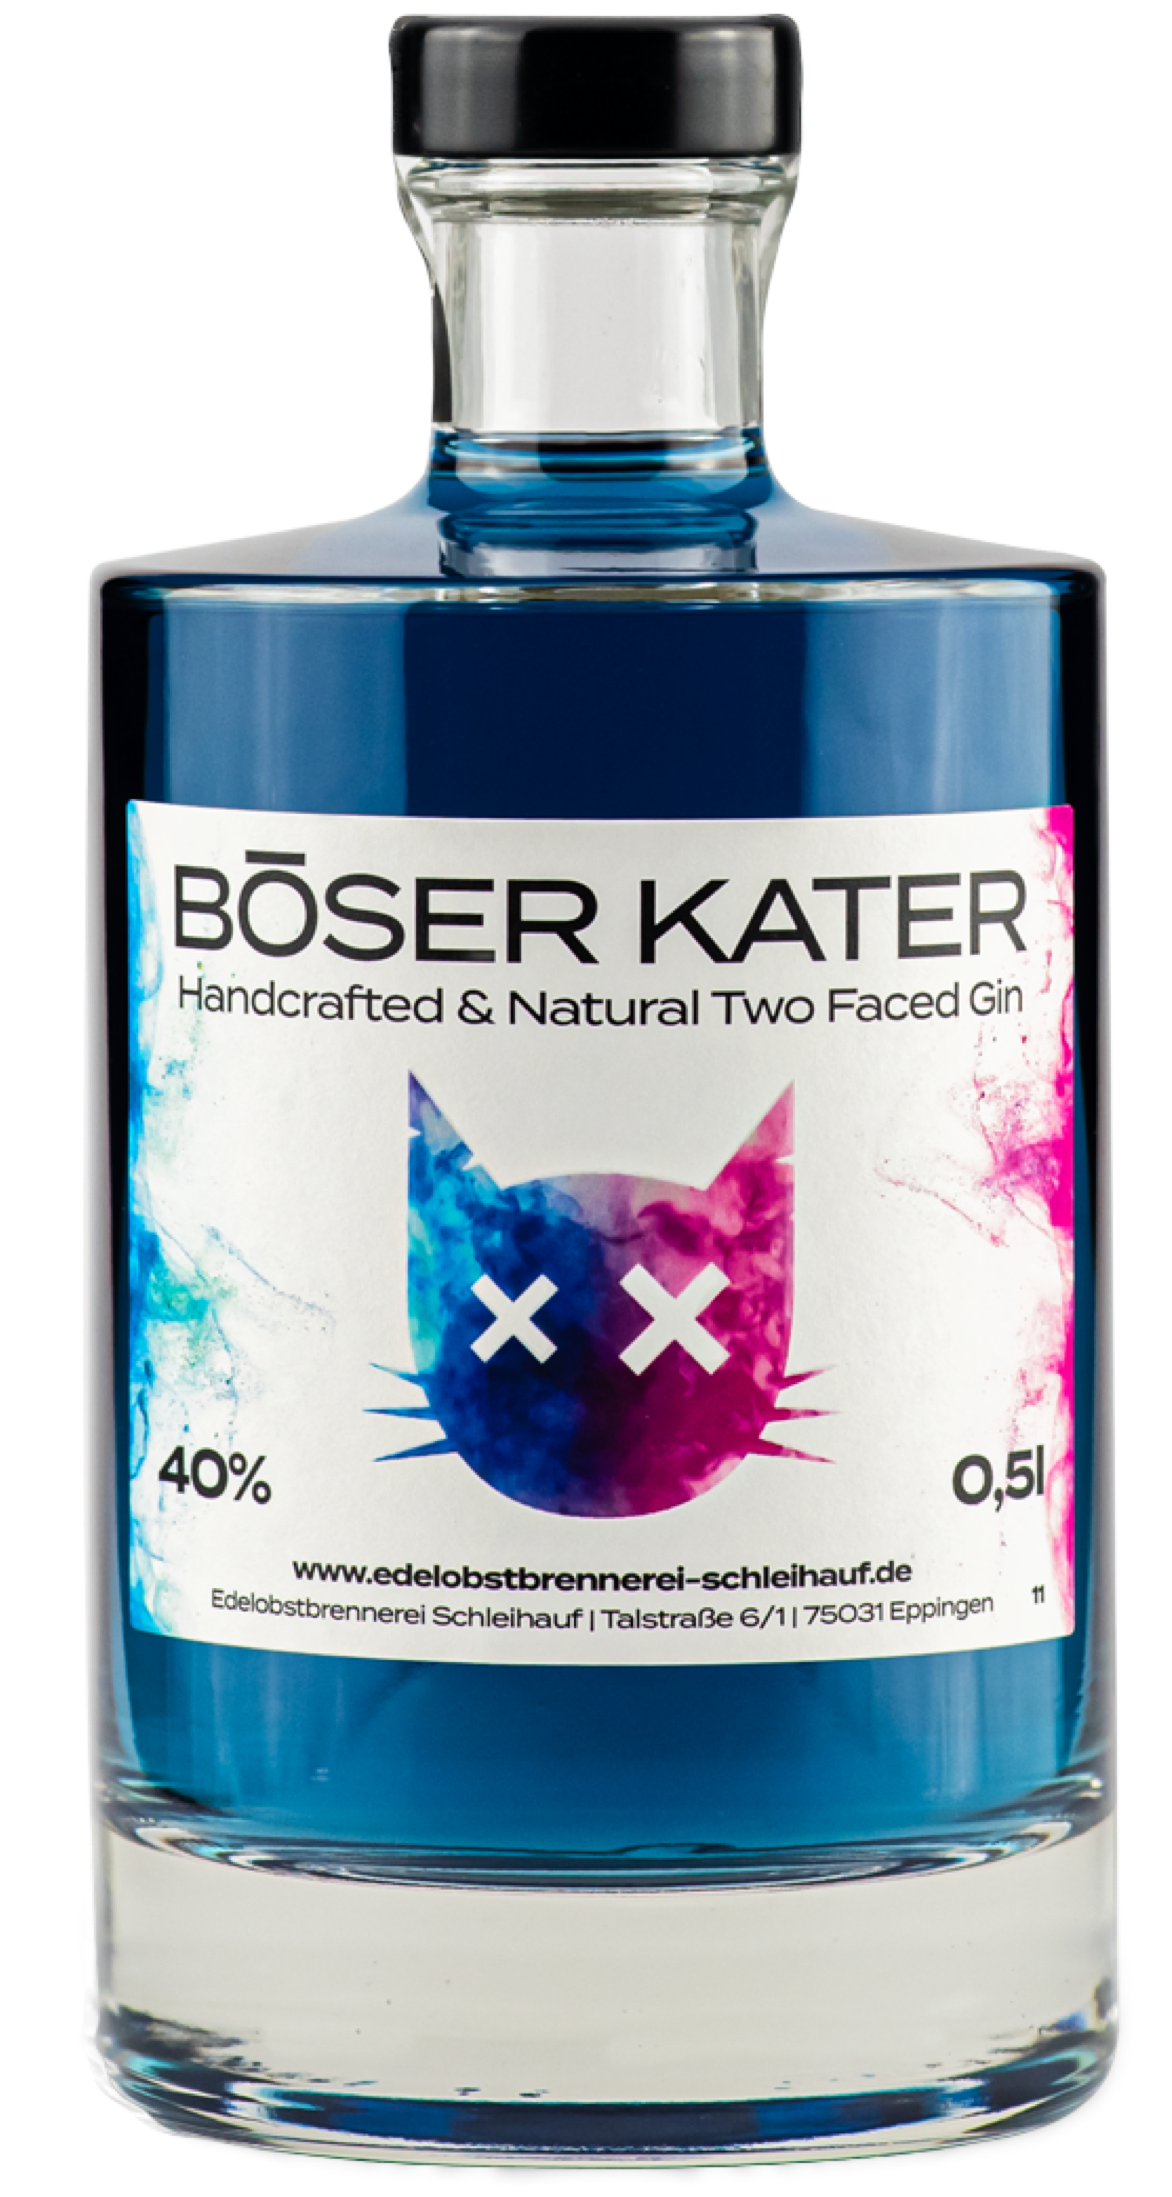 Böser Kater Handcrafted & Natural Two Faced Gin 40% vol. 0,5l